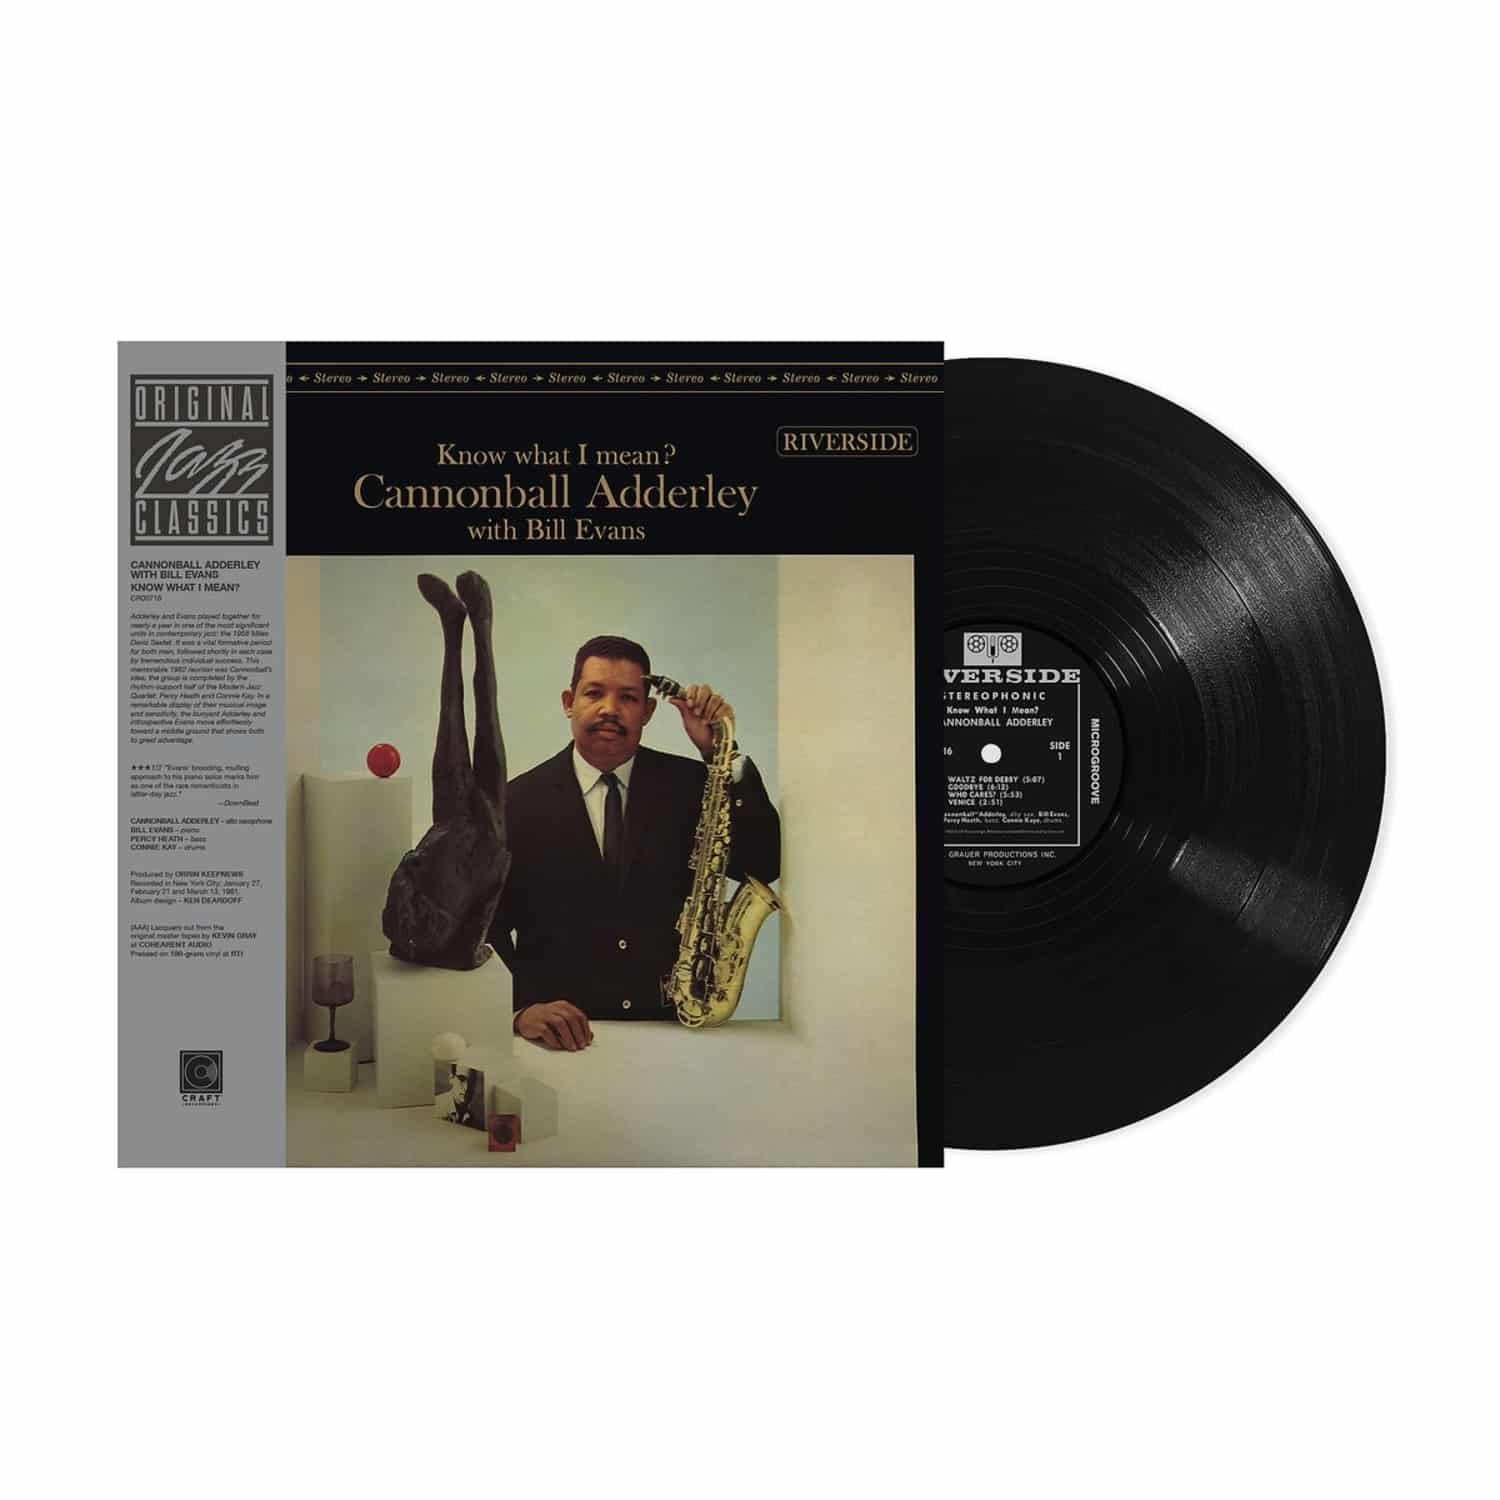 Cannonball Adderley / Bill Evans - KNOW WHAT I MEAN 